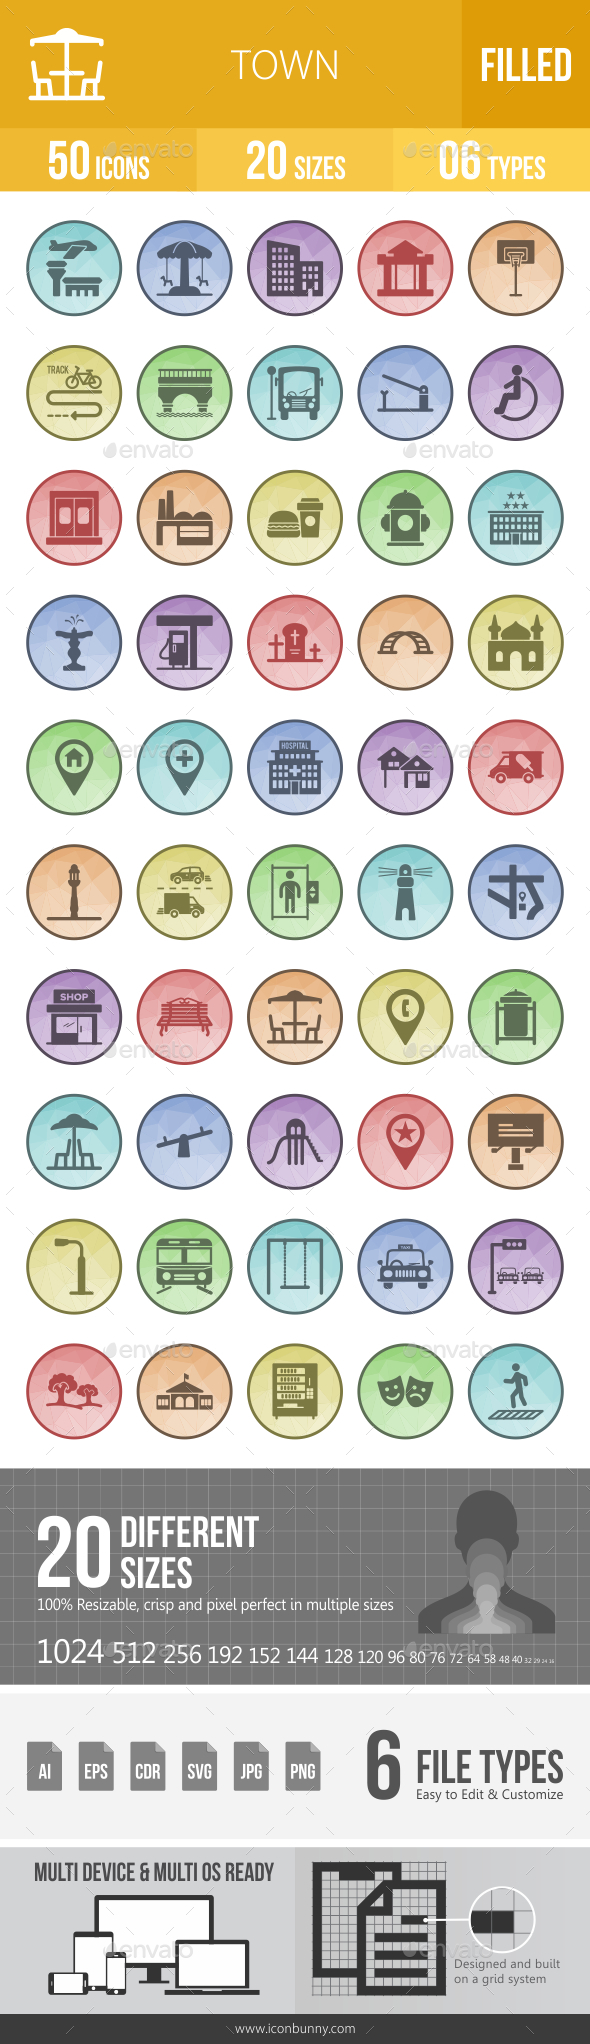 GraphicRiver 50 Town Filled Low Poly Icons 21180540